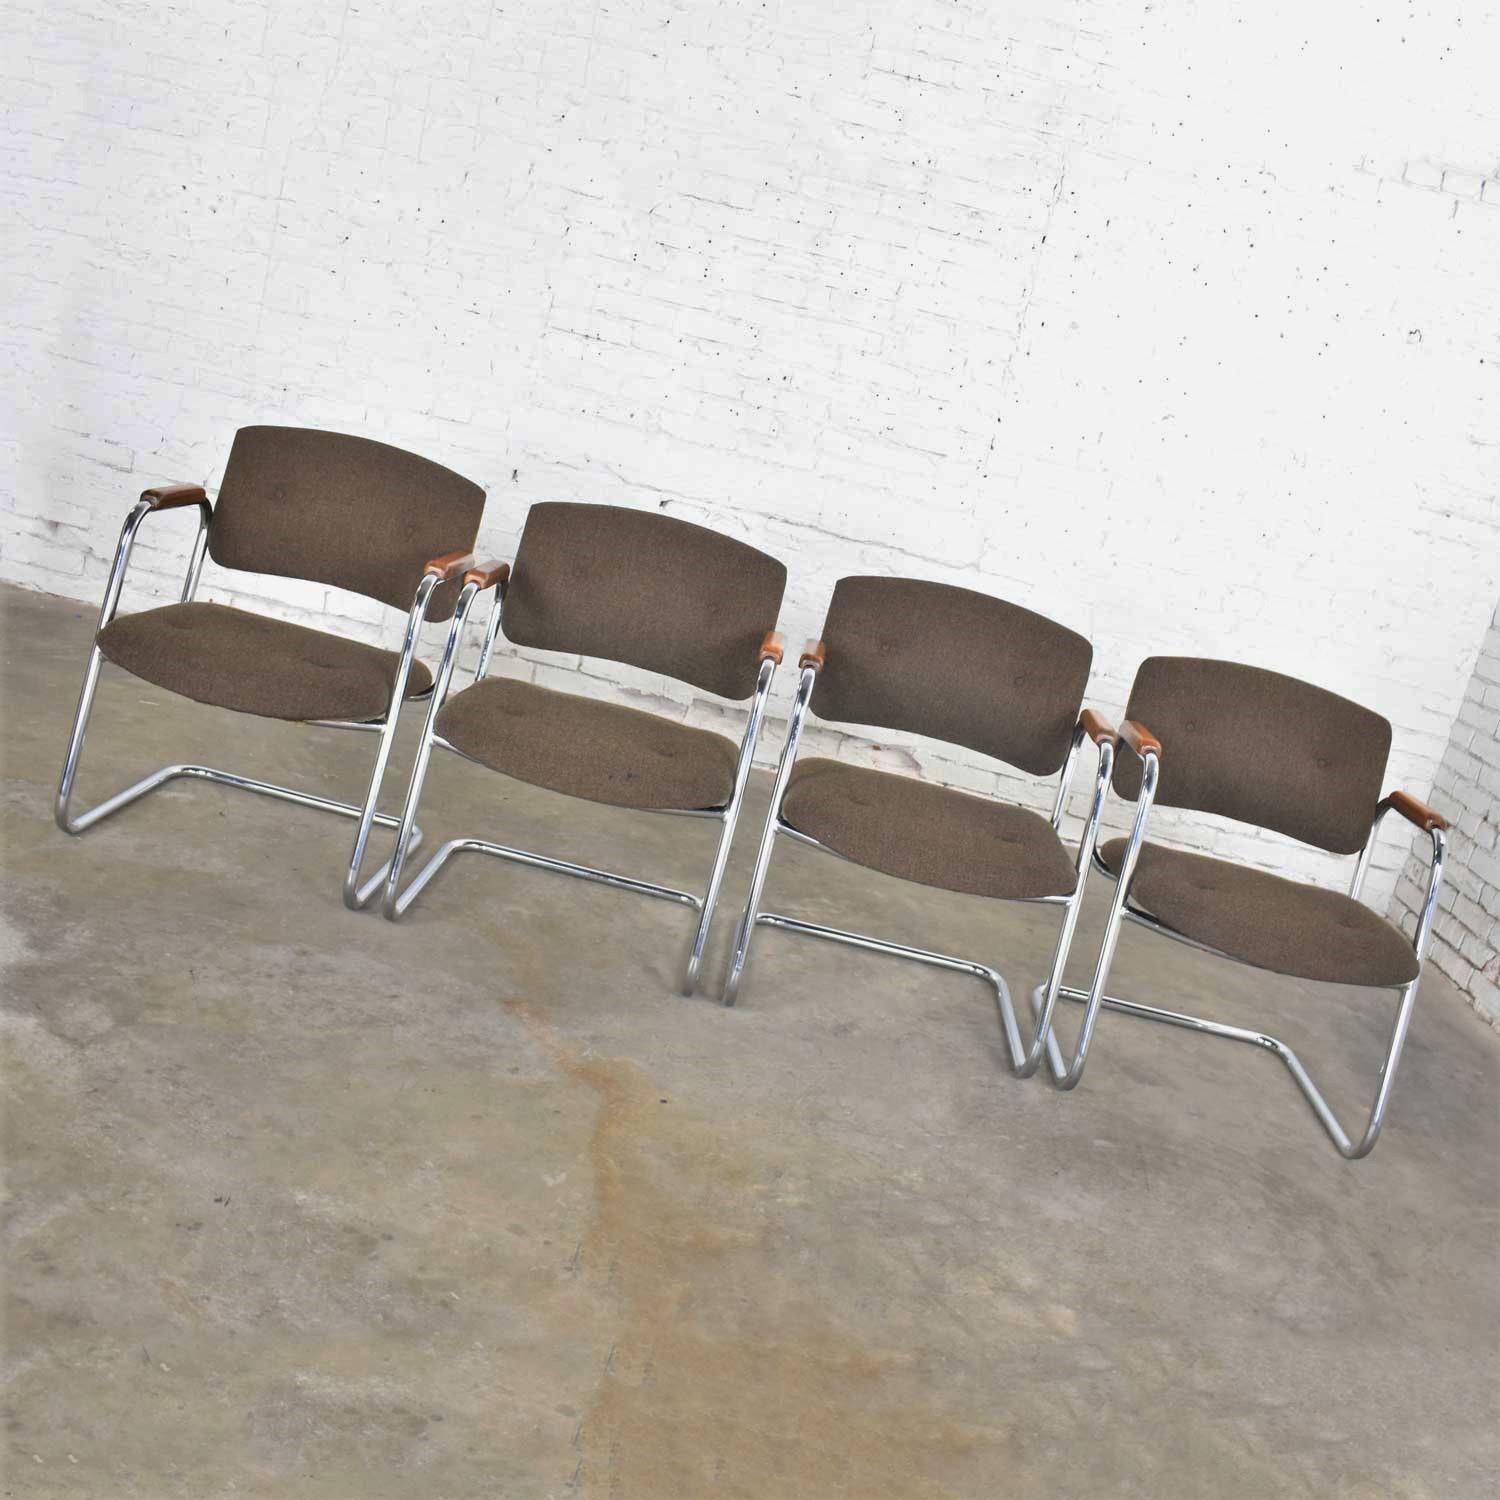 Fabric 4 Cantilever Armchairs Chrome Brown w/ Wood Arms Style of Steelcase or Pollock